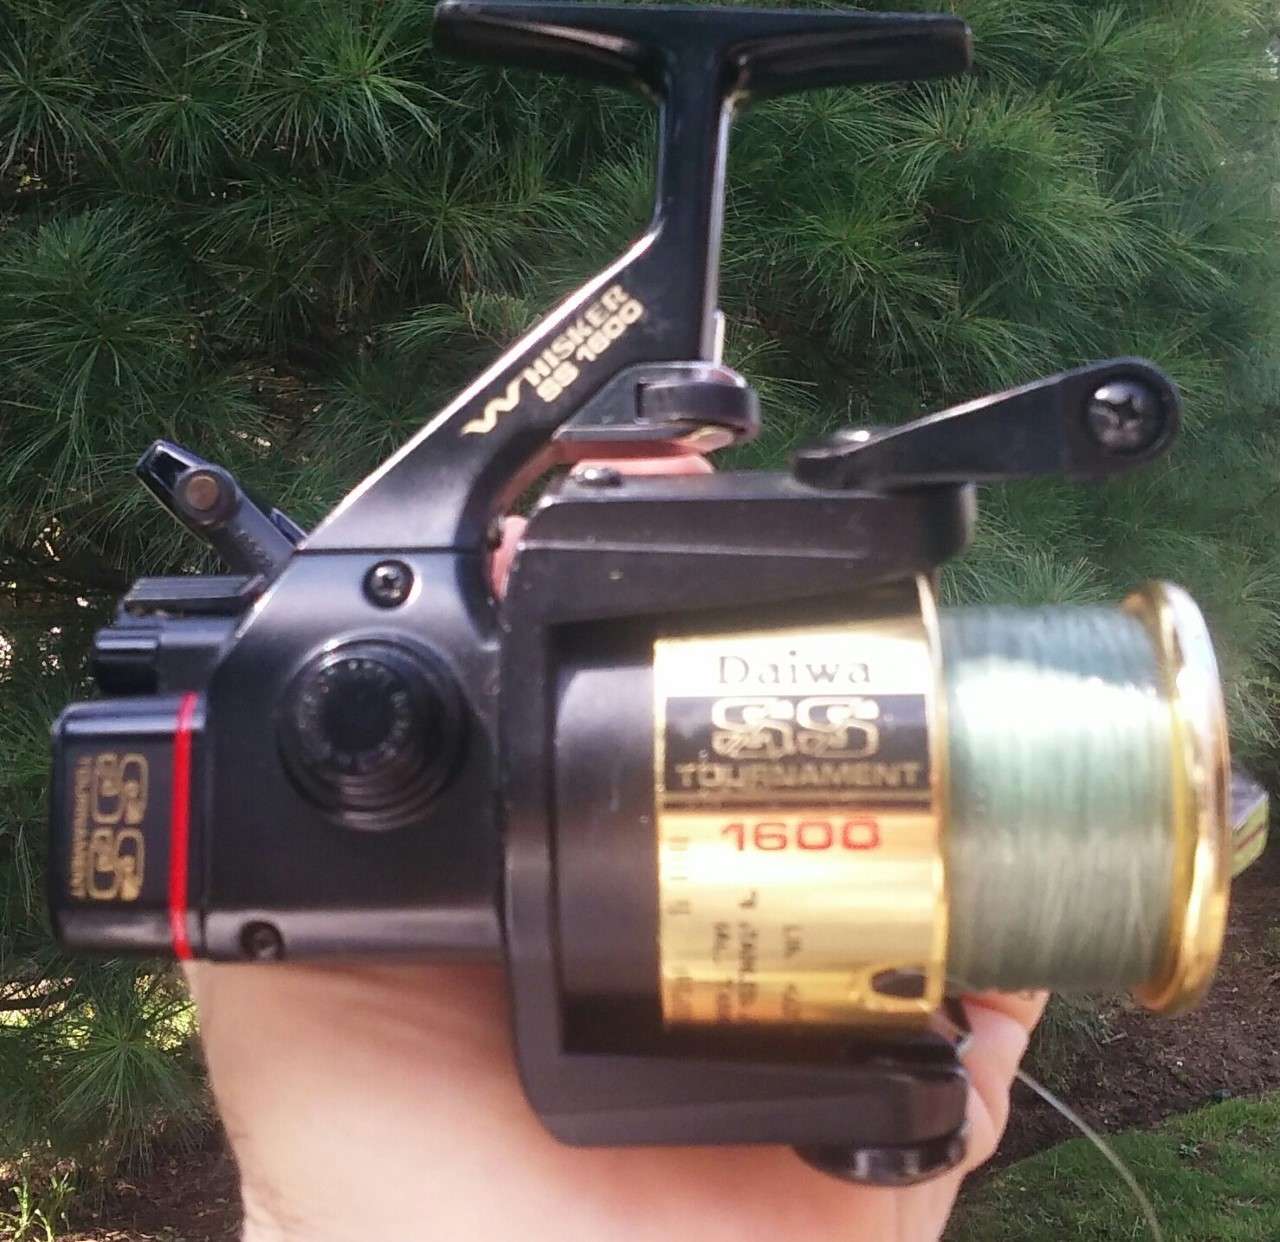 Southern California - Daiwa Tournament Whisker SS 1600 Spinning Reel, good  condition